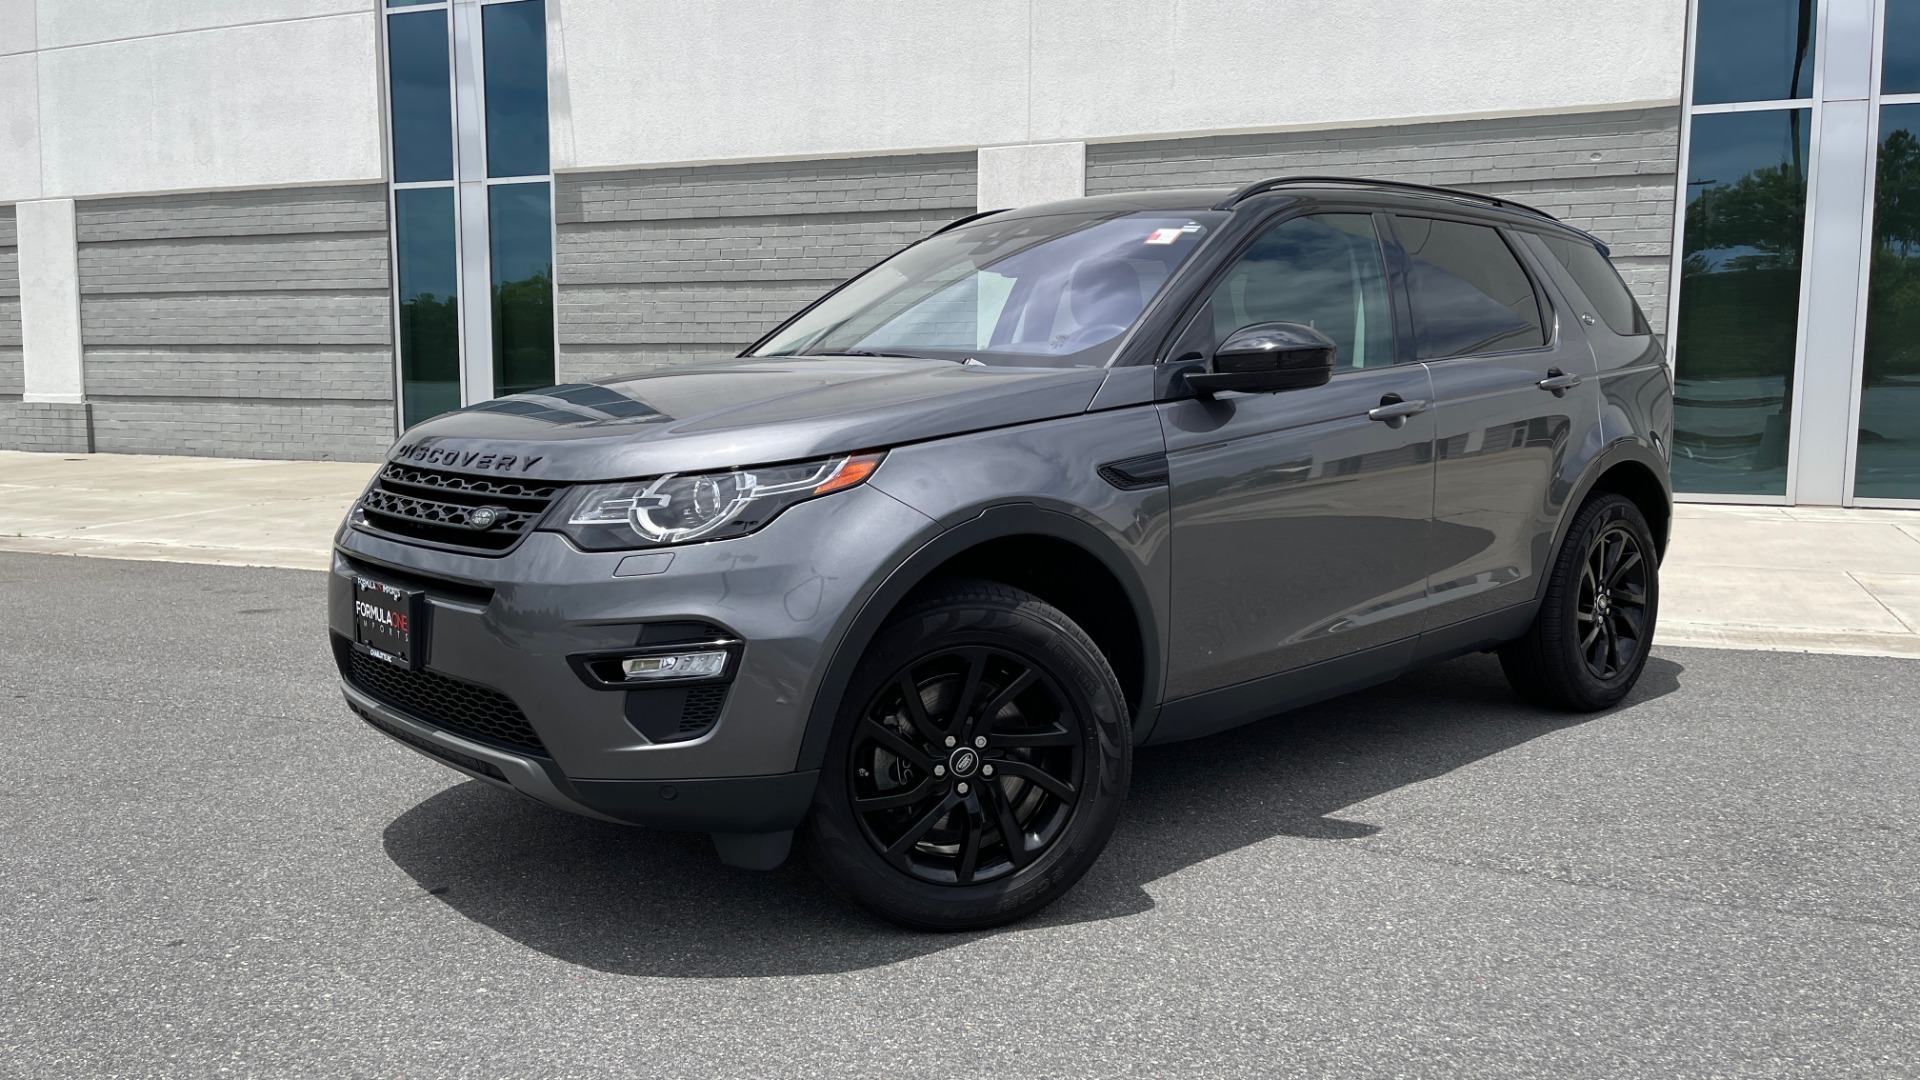 Used 2018 Land Rover DISCOVERY SPORT HSE 4WD / NAV / PANO-ROOF / MERIDIAN  SND / HTD STS / LANE ASST / REARVIEW For Sale ($34,295)